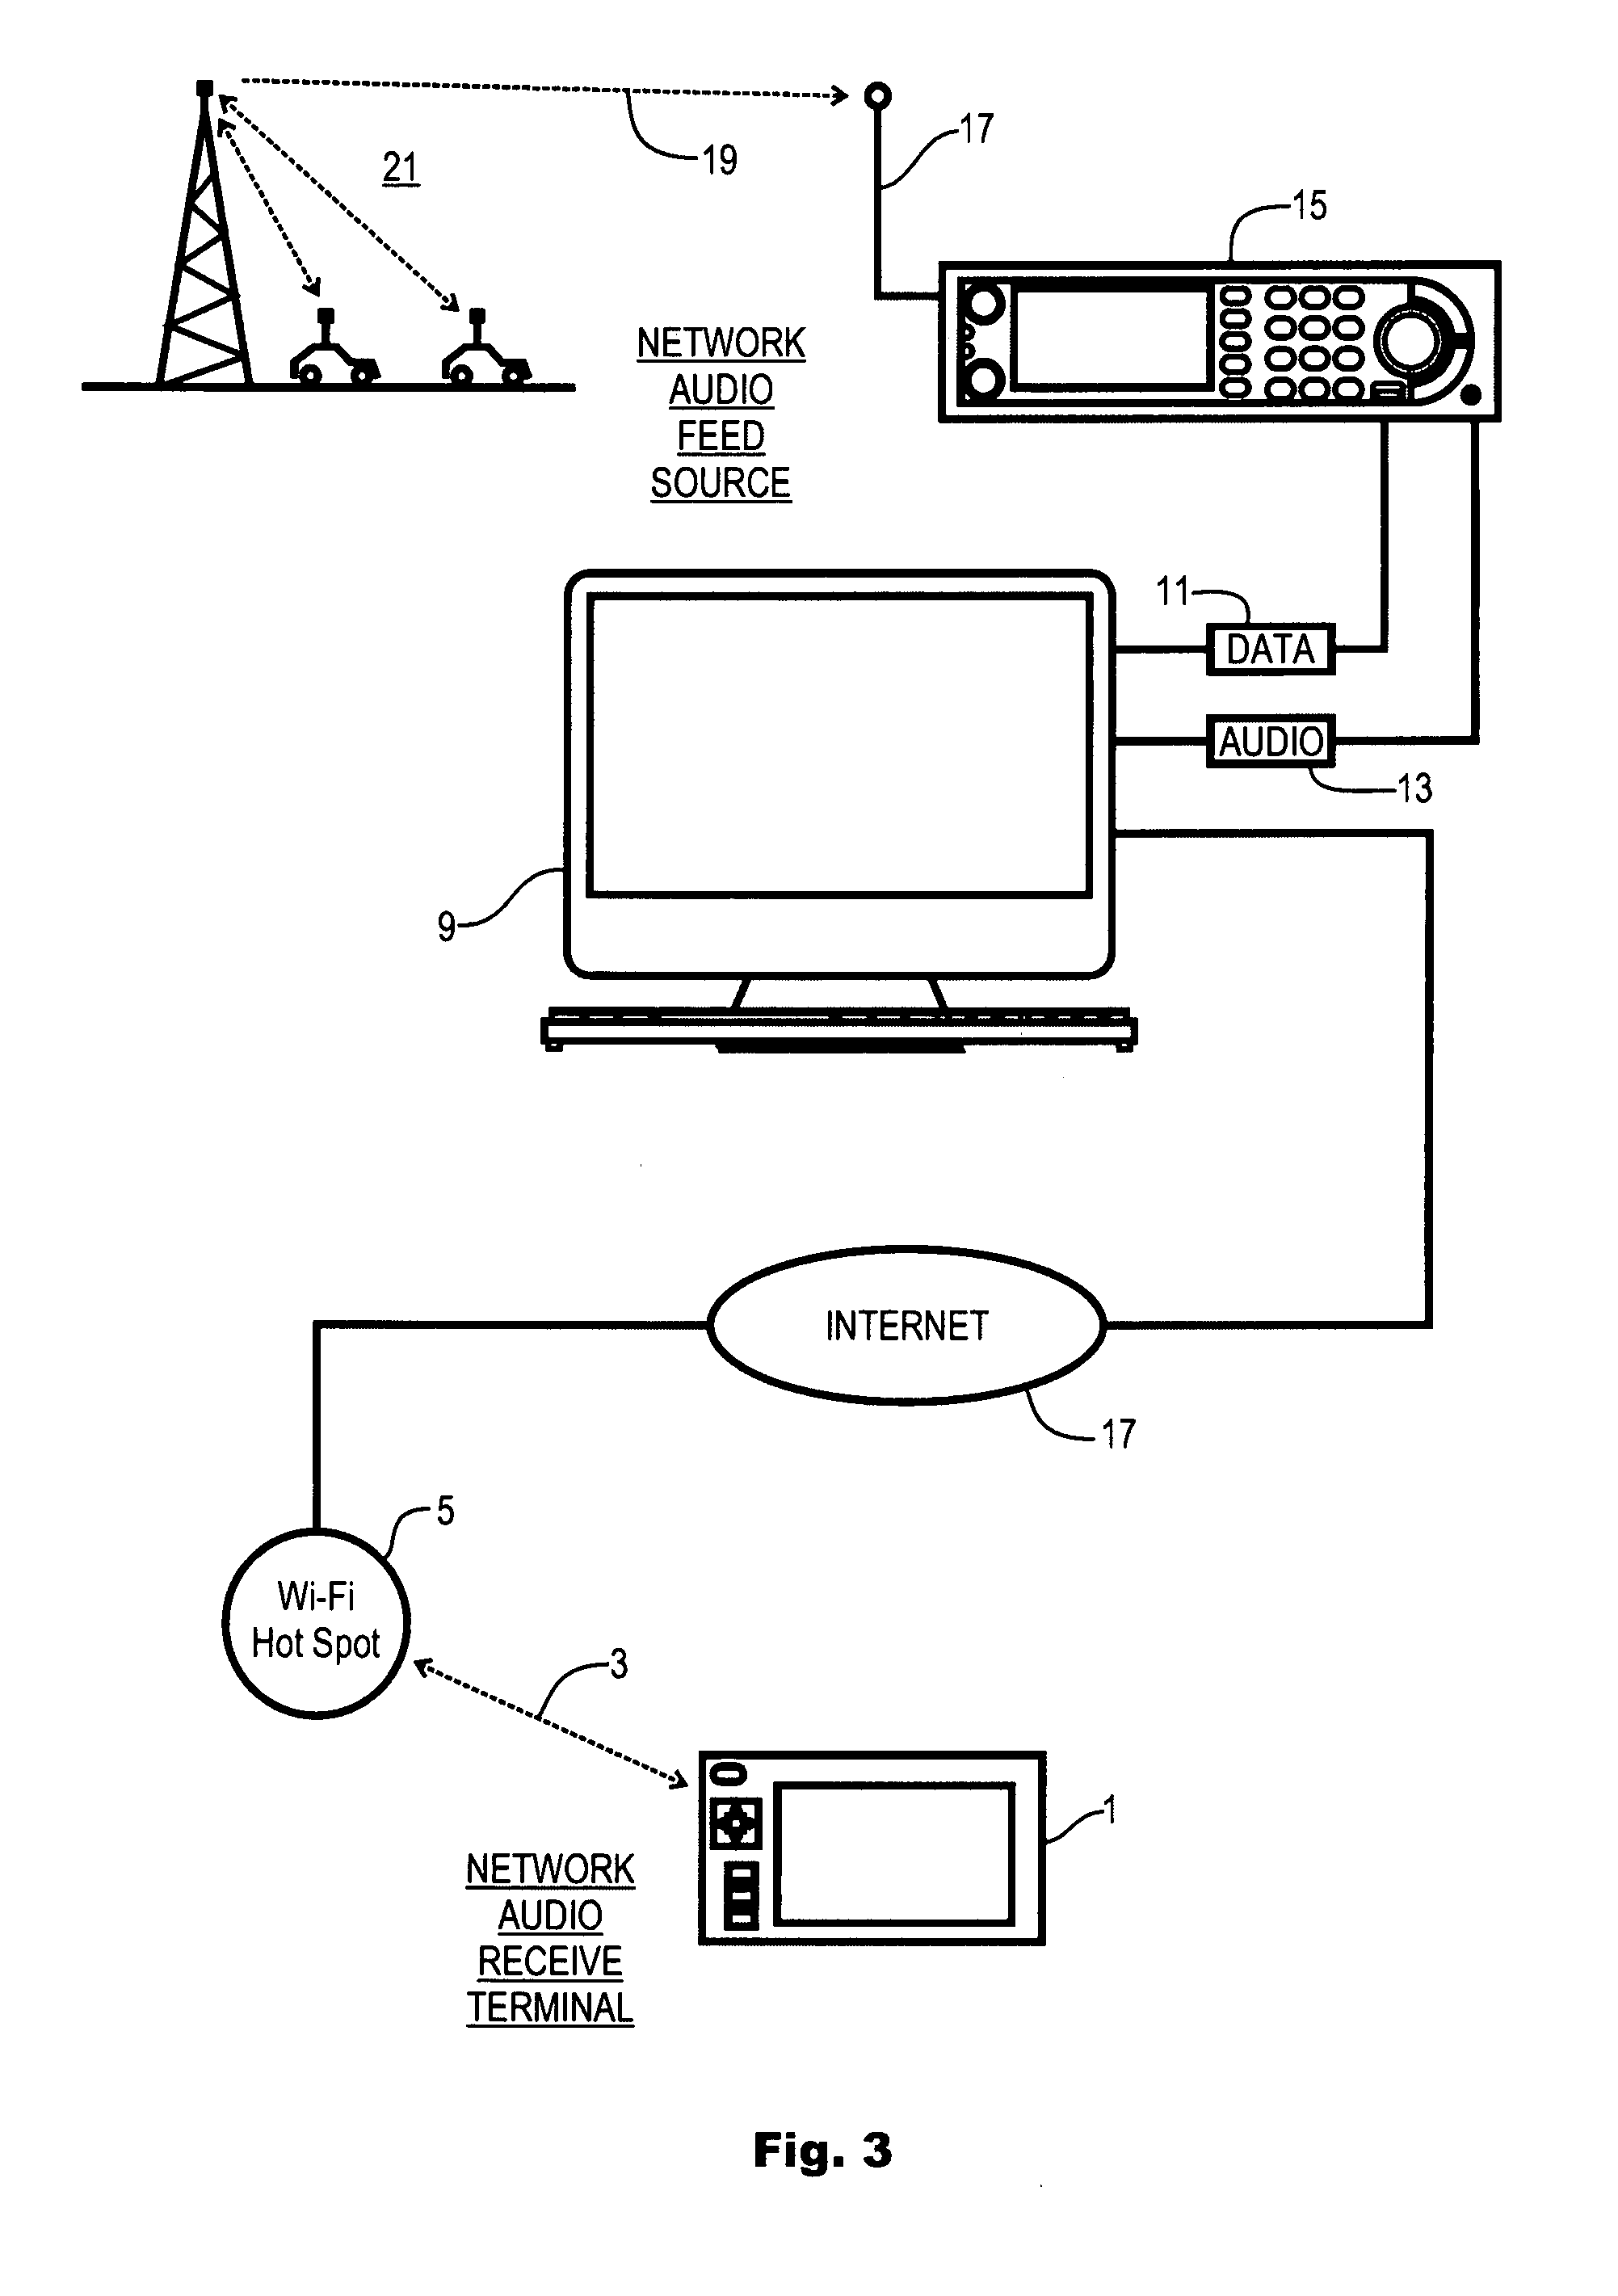 Network audio terminal and method